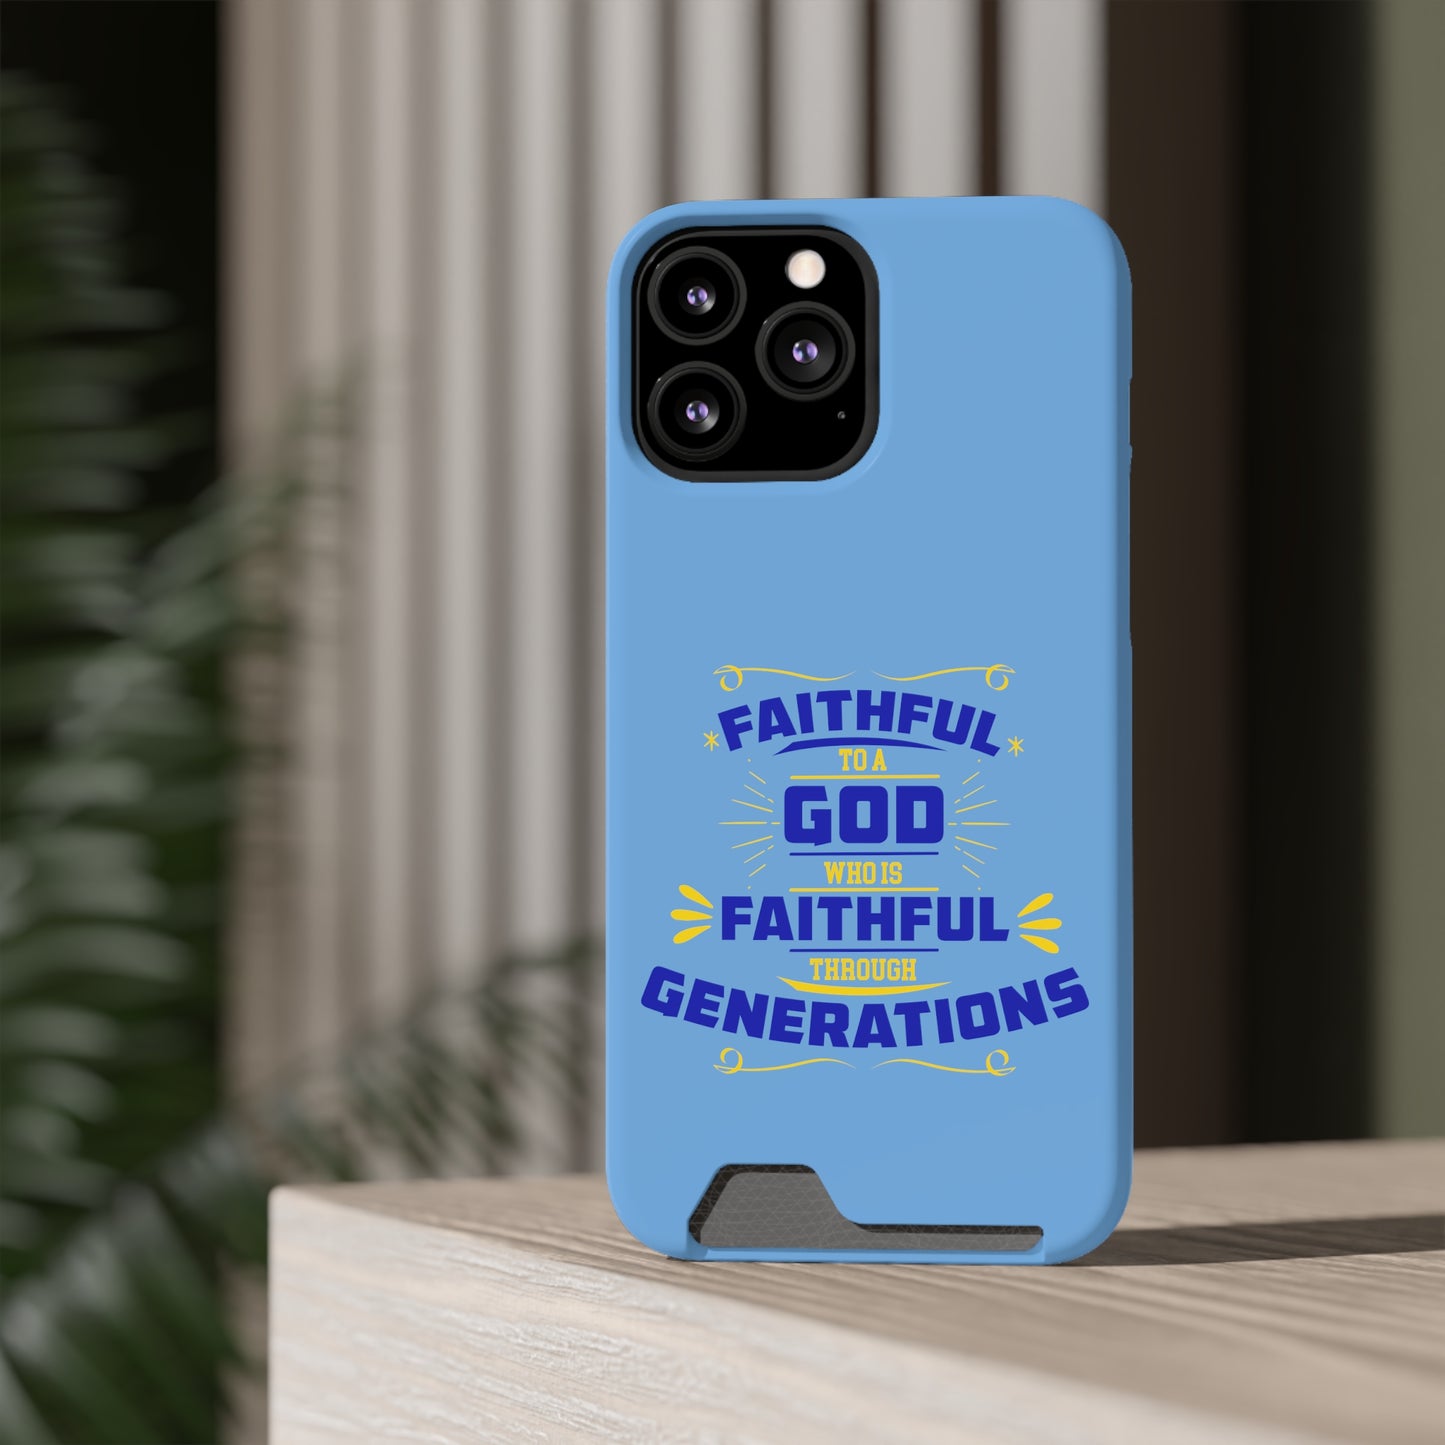 Faithful To A God Who Is Faithful Through Generations Phone Case With Card Holder